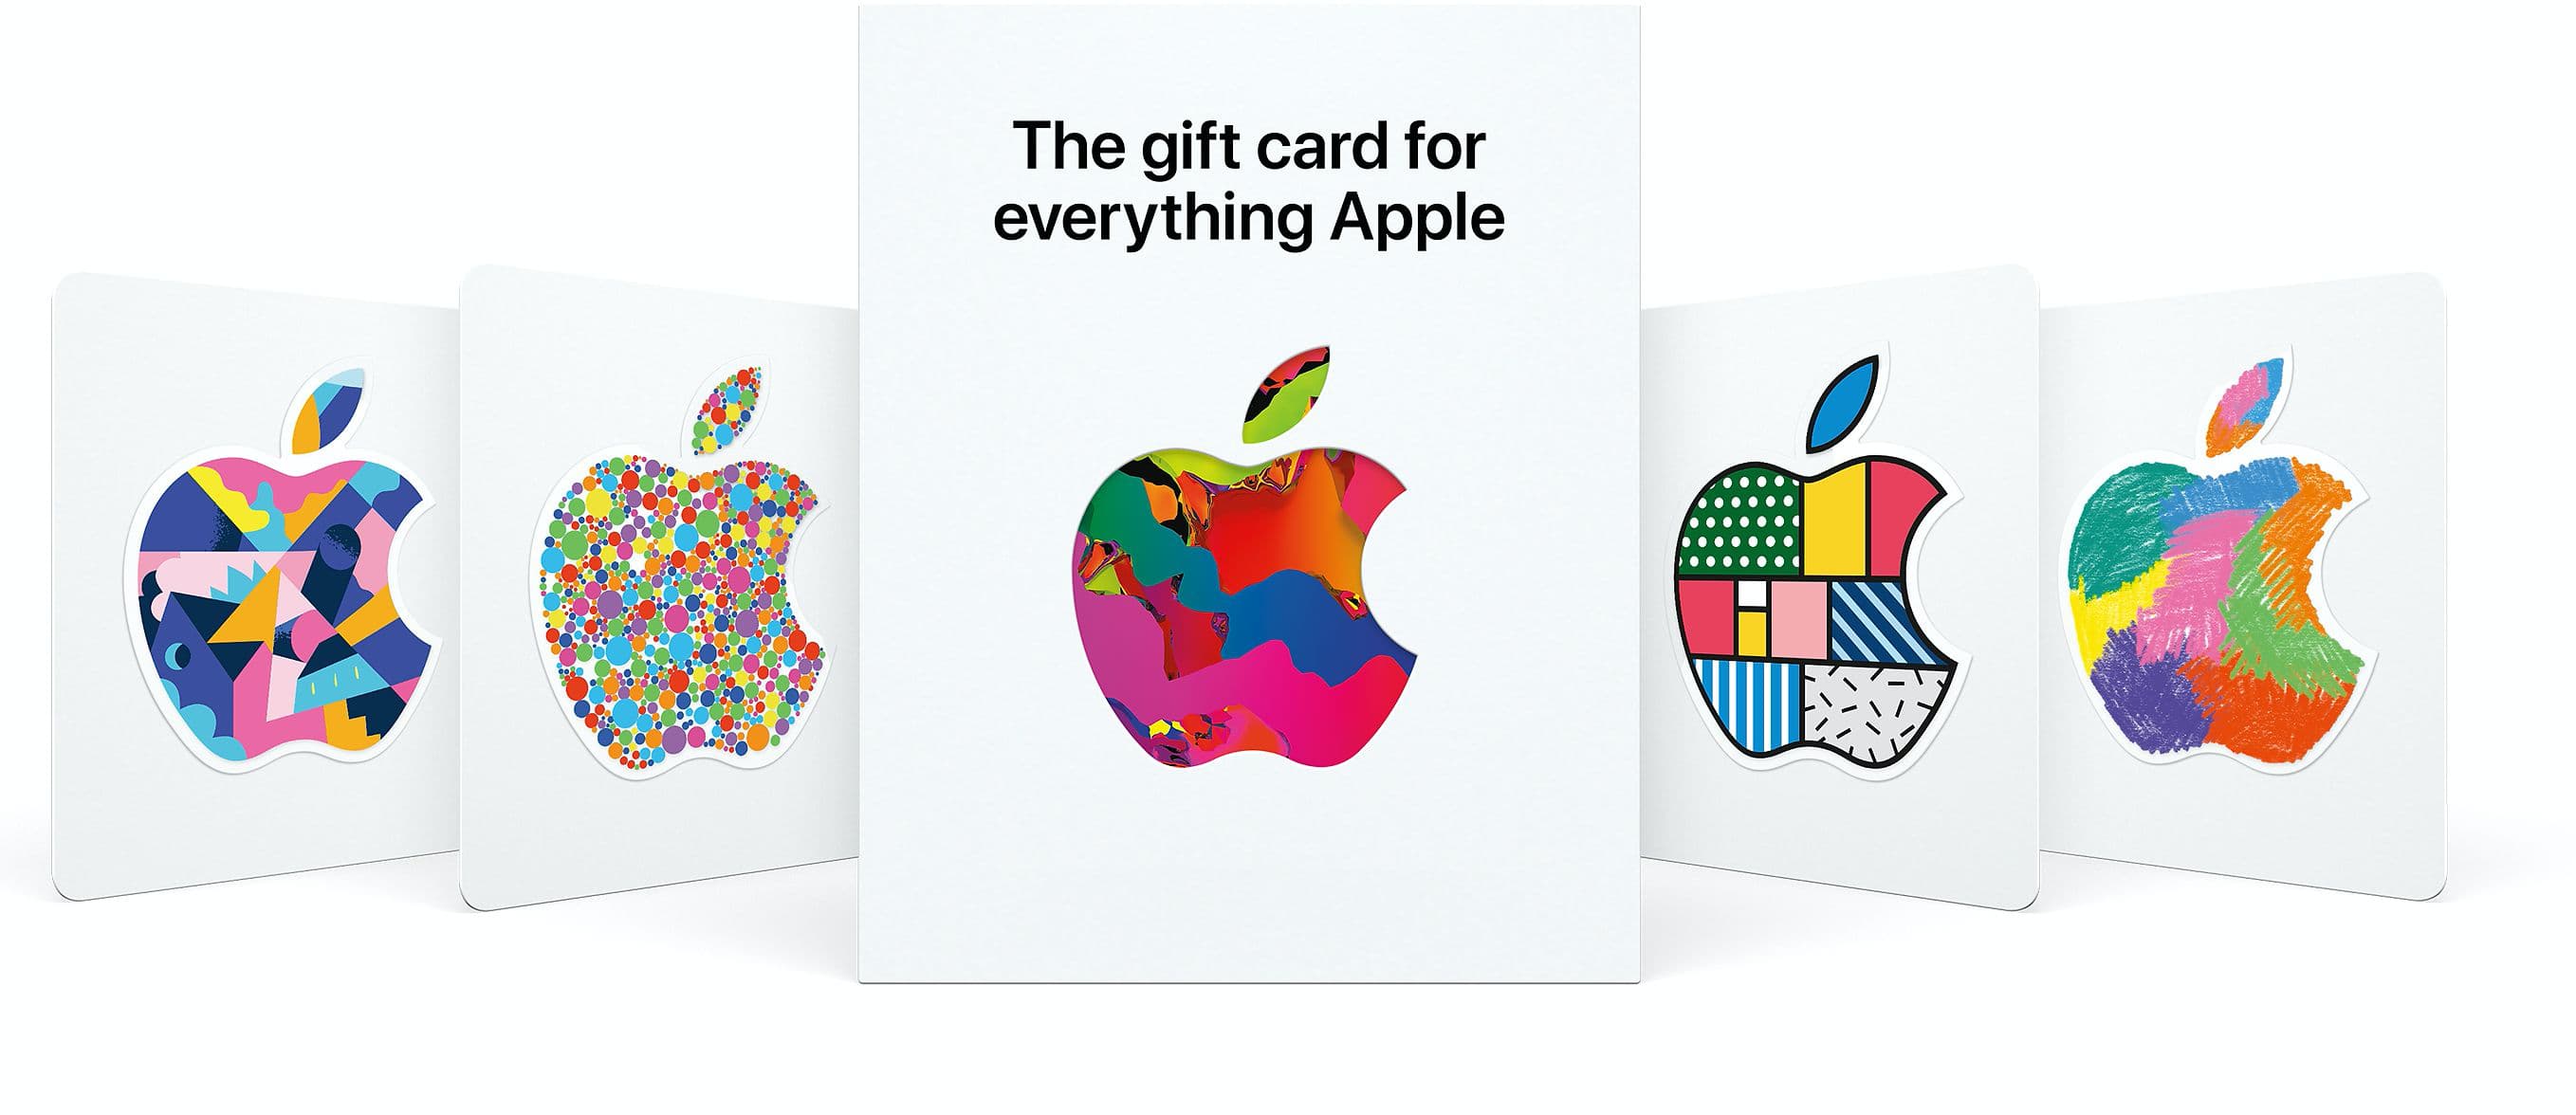 Marketing image showing off the various Apple gift cards